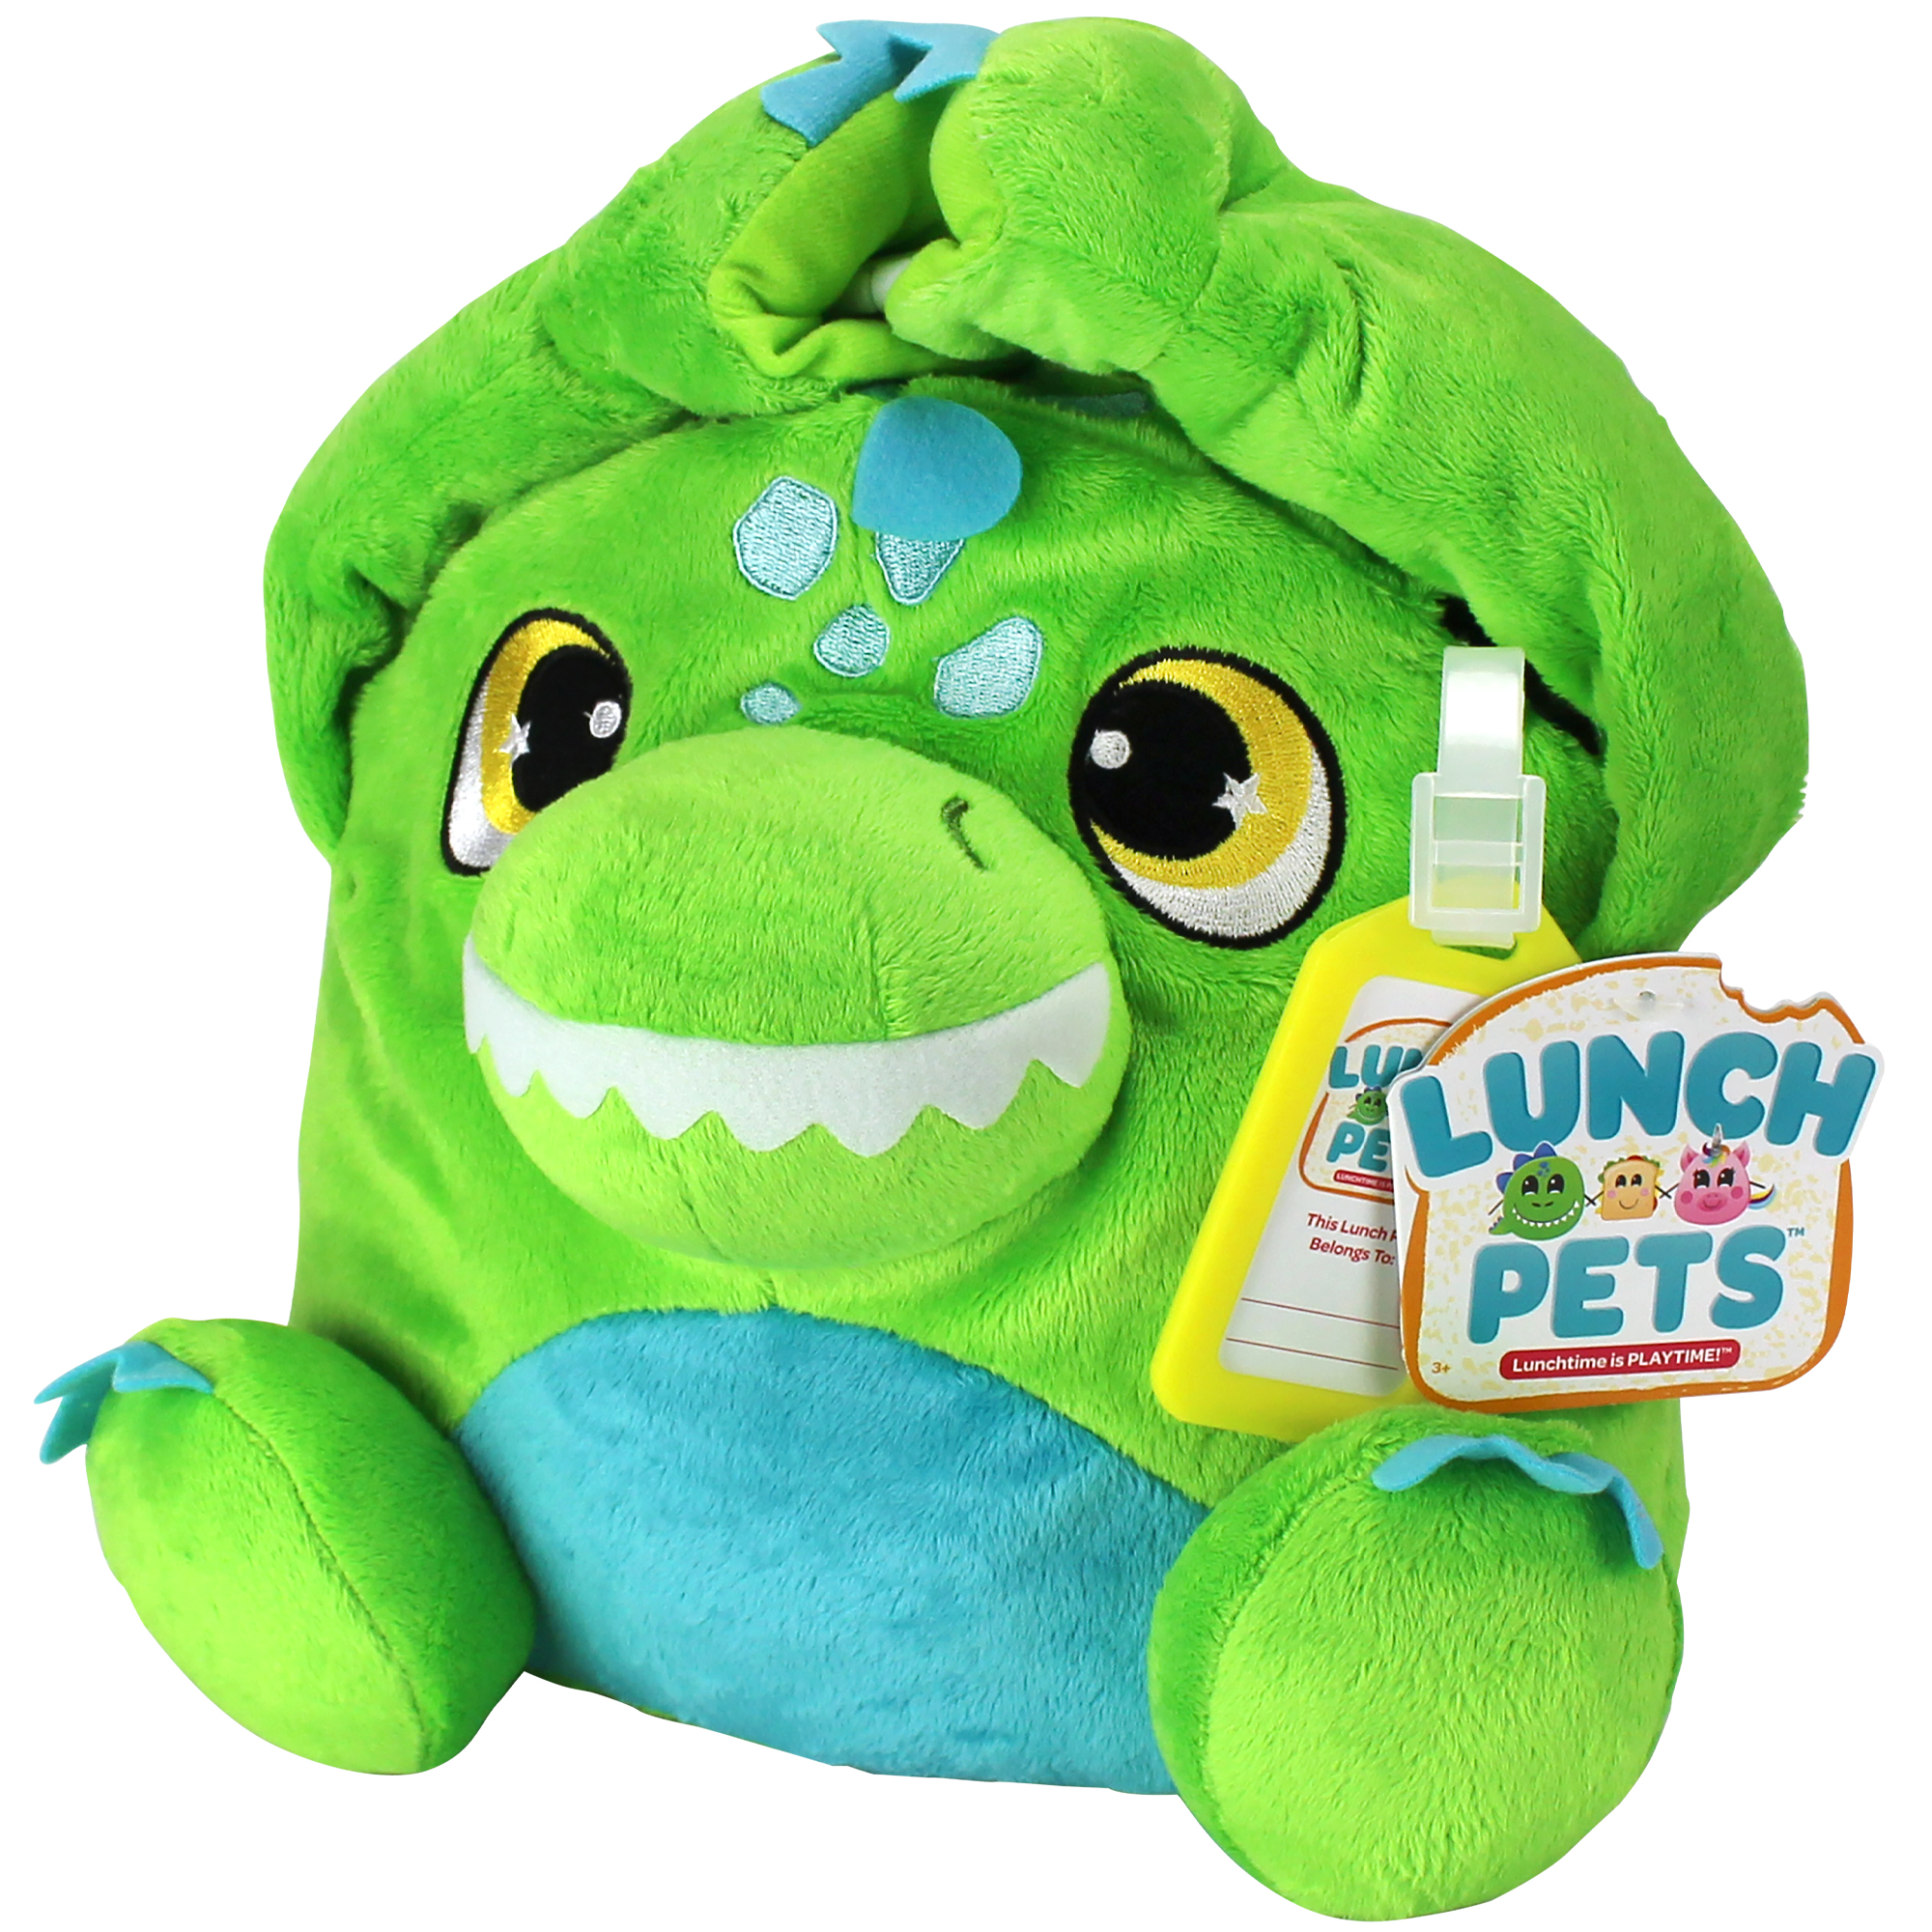 Lunch Pets Insulated Kids Lunch Box – Plush Animal and Lunch Box Combination - Munchosaur - image 1 of 6